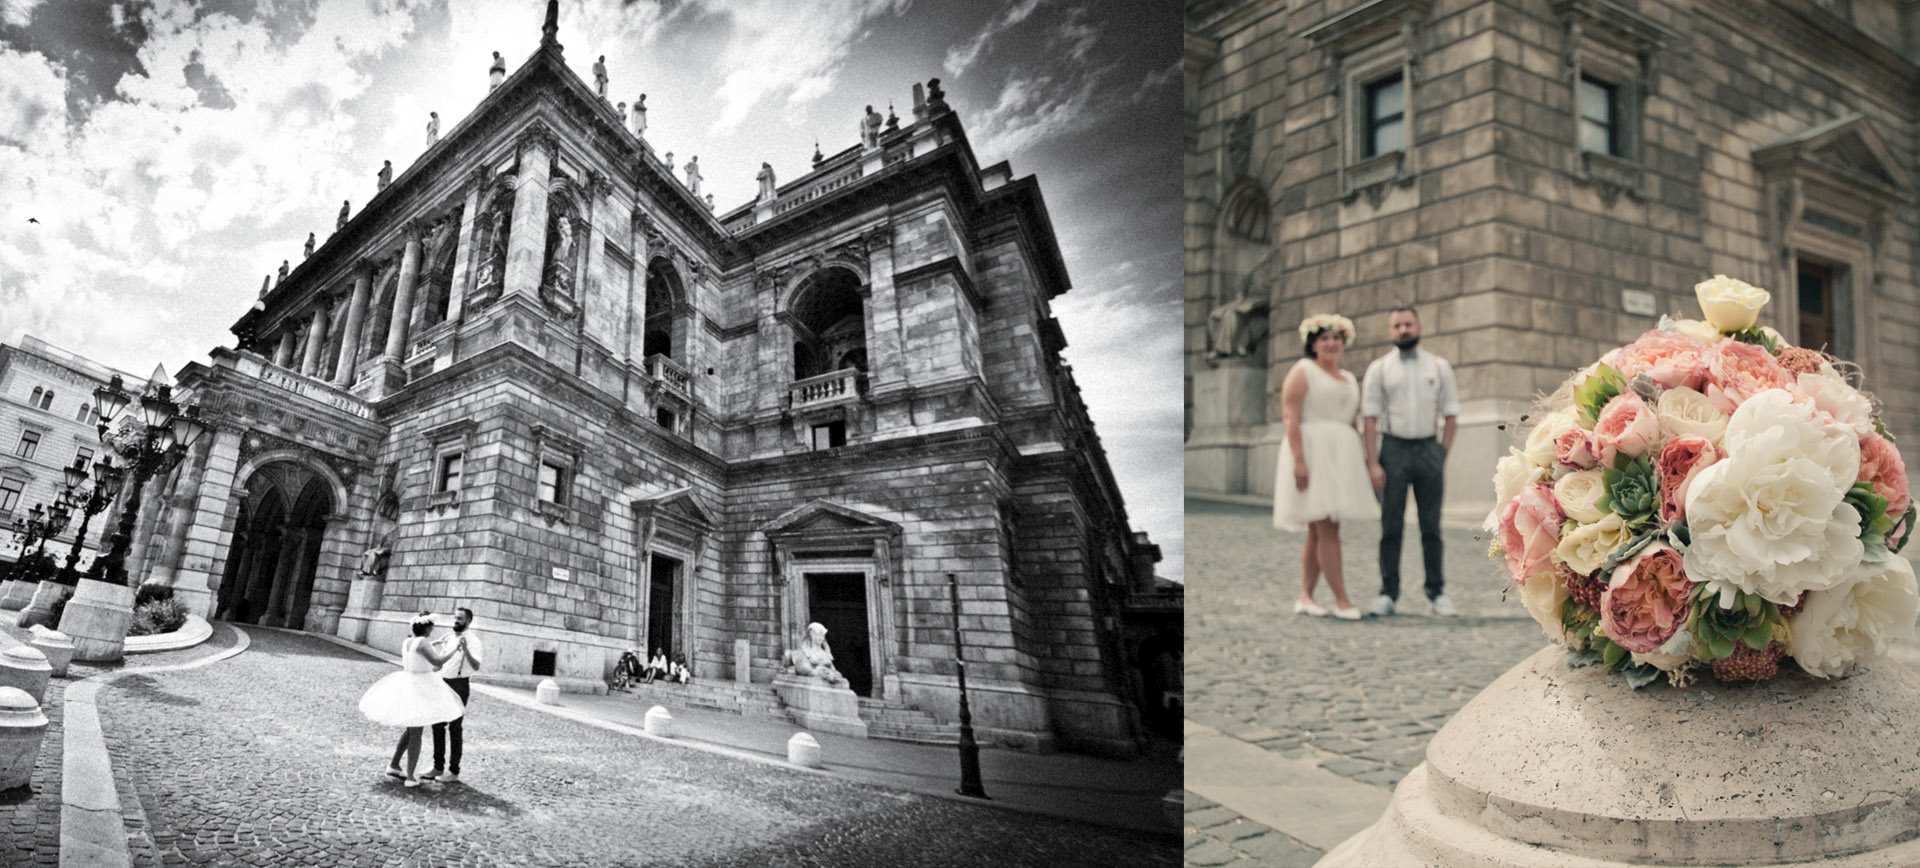 budapest wedding package - elope to europe